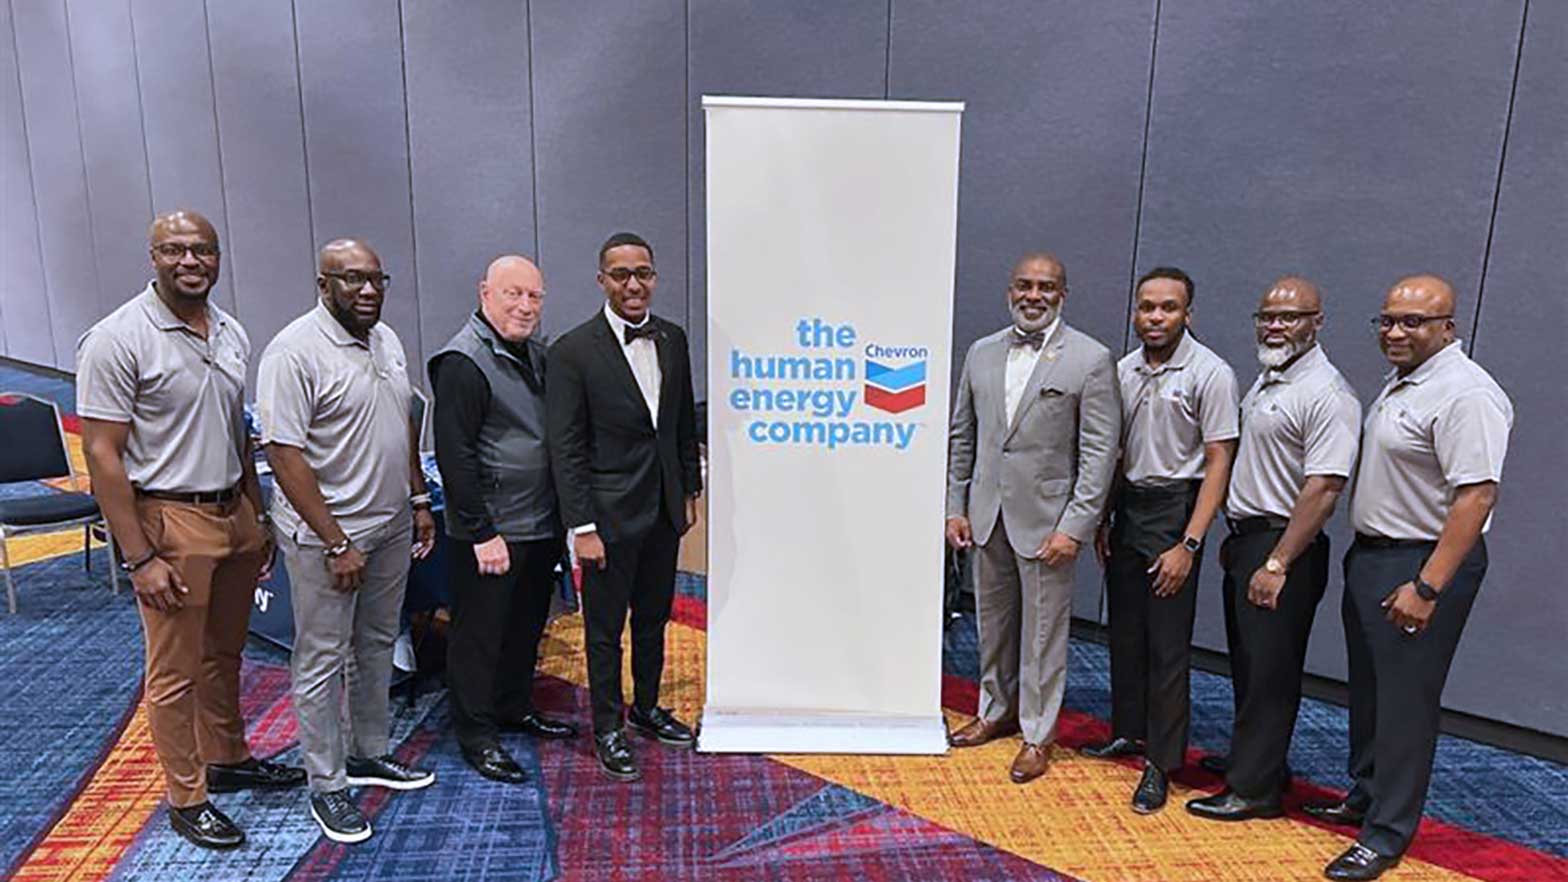 Qua Thomas joined other Chevron colleagues at the Alpha Phi Alpha Southwestern Regional Convention Conference in March 2023.